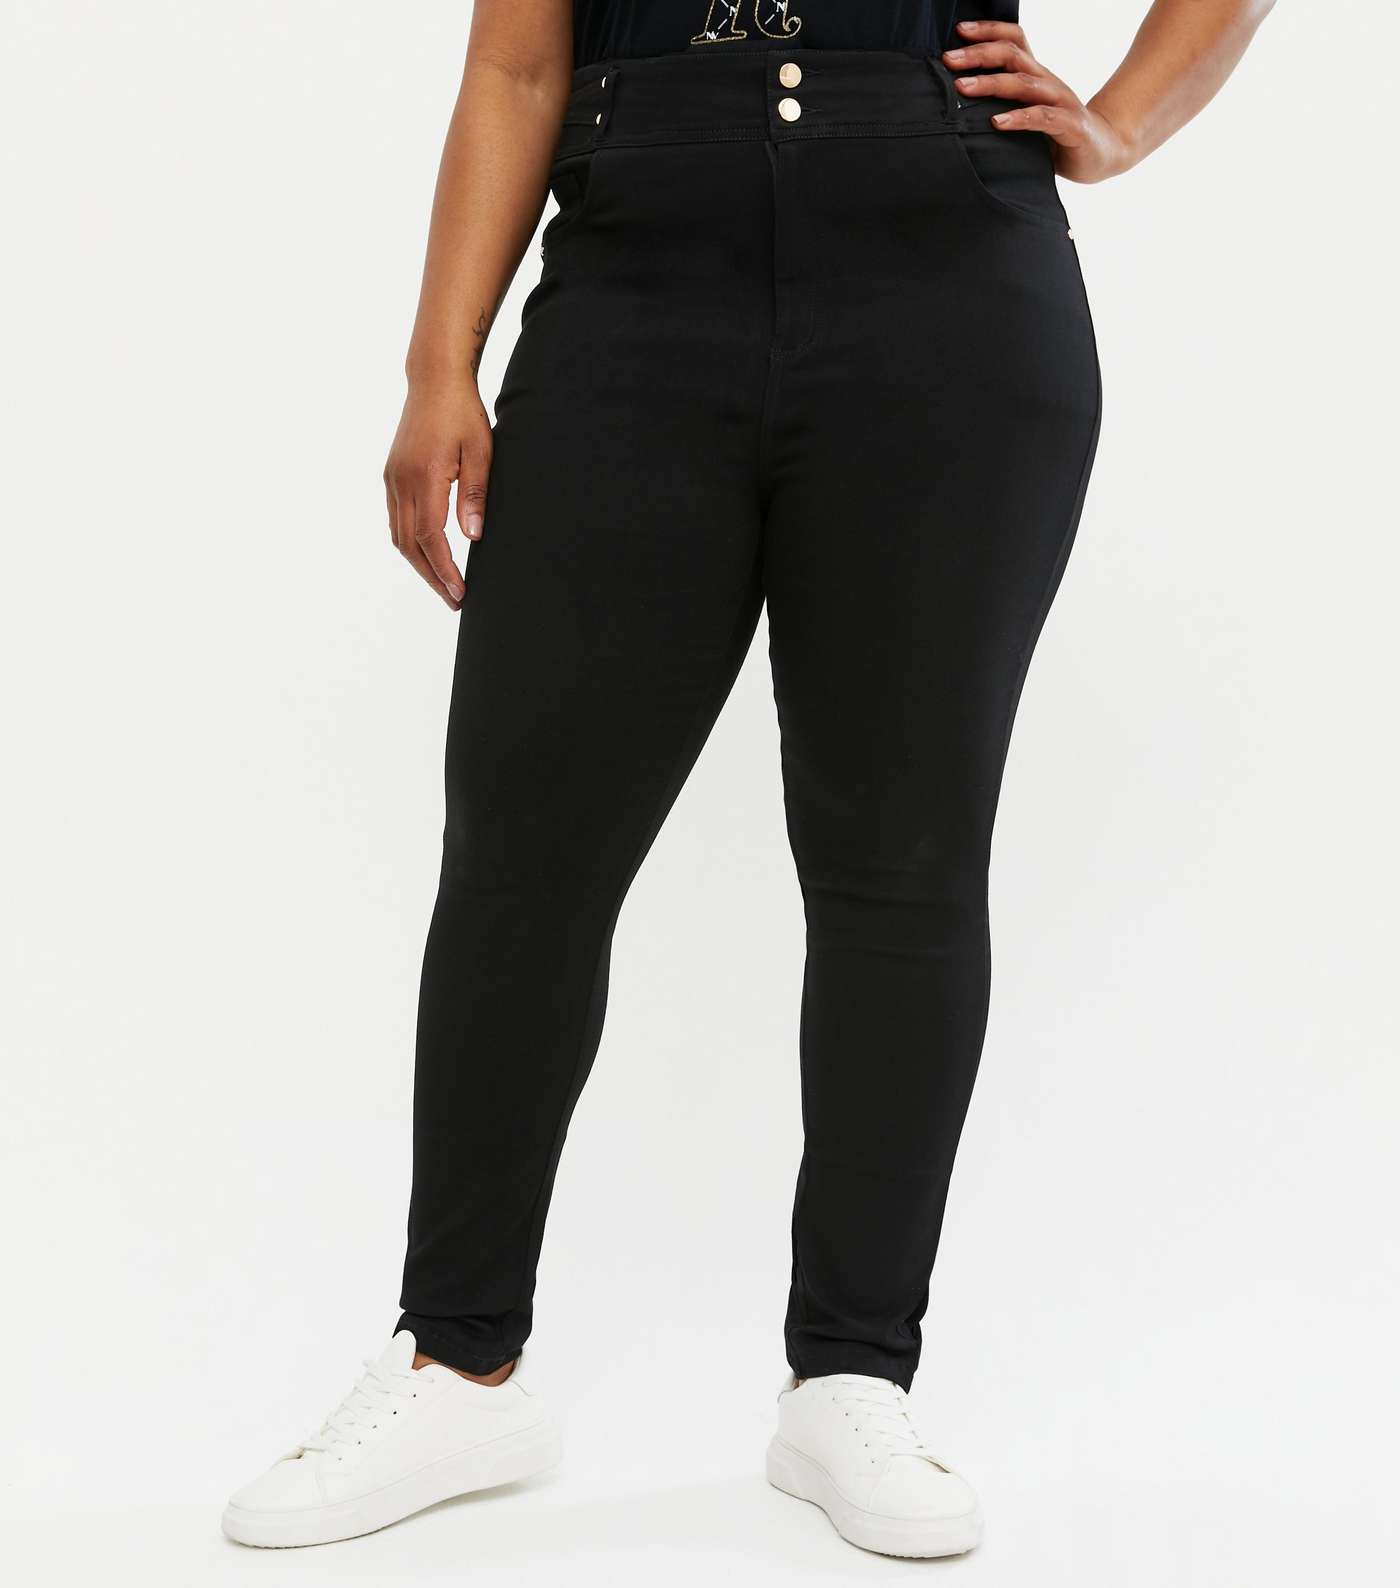 Blue Vanilla Curves Black Double Button Skinny Jeans Image 2